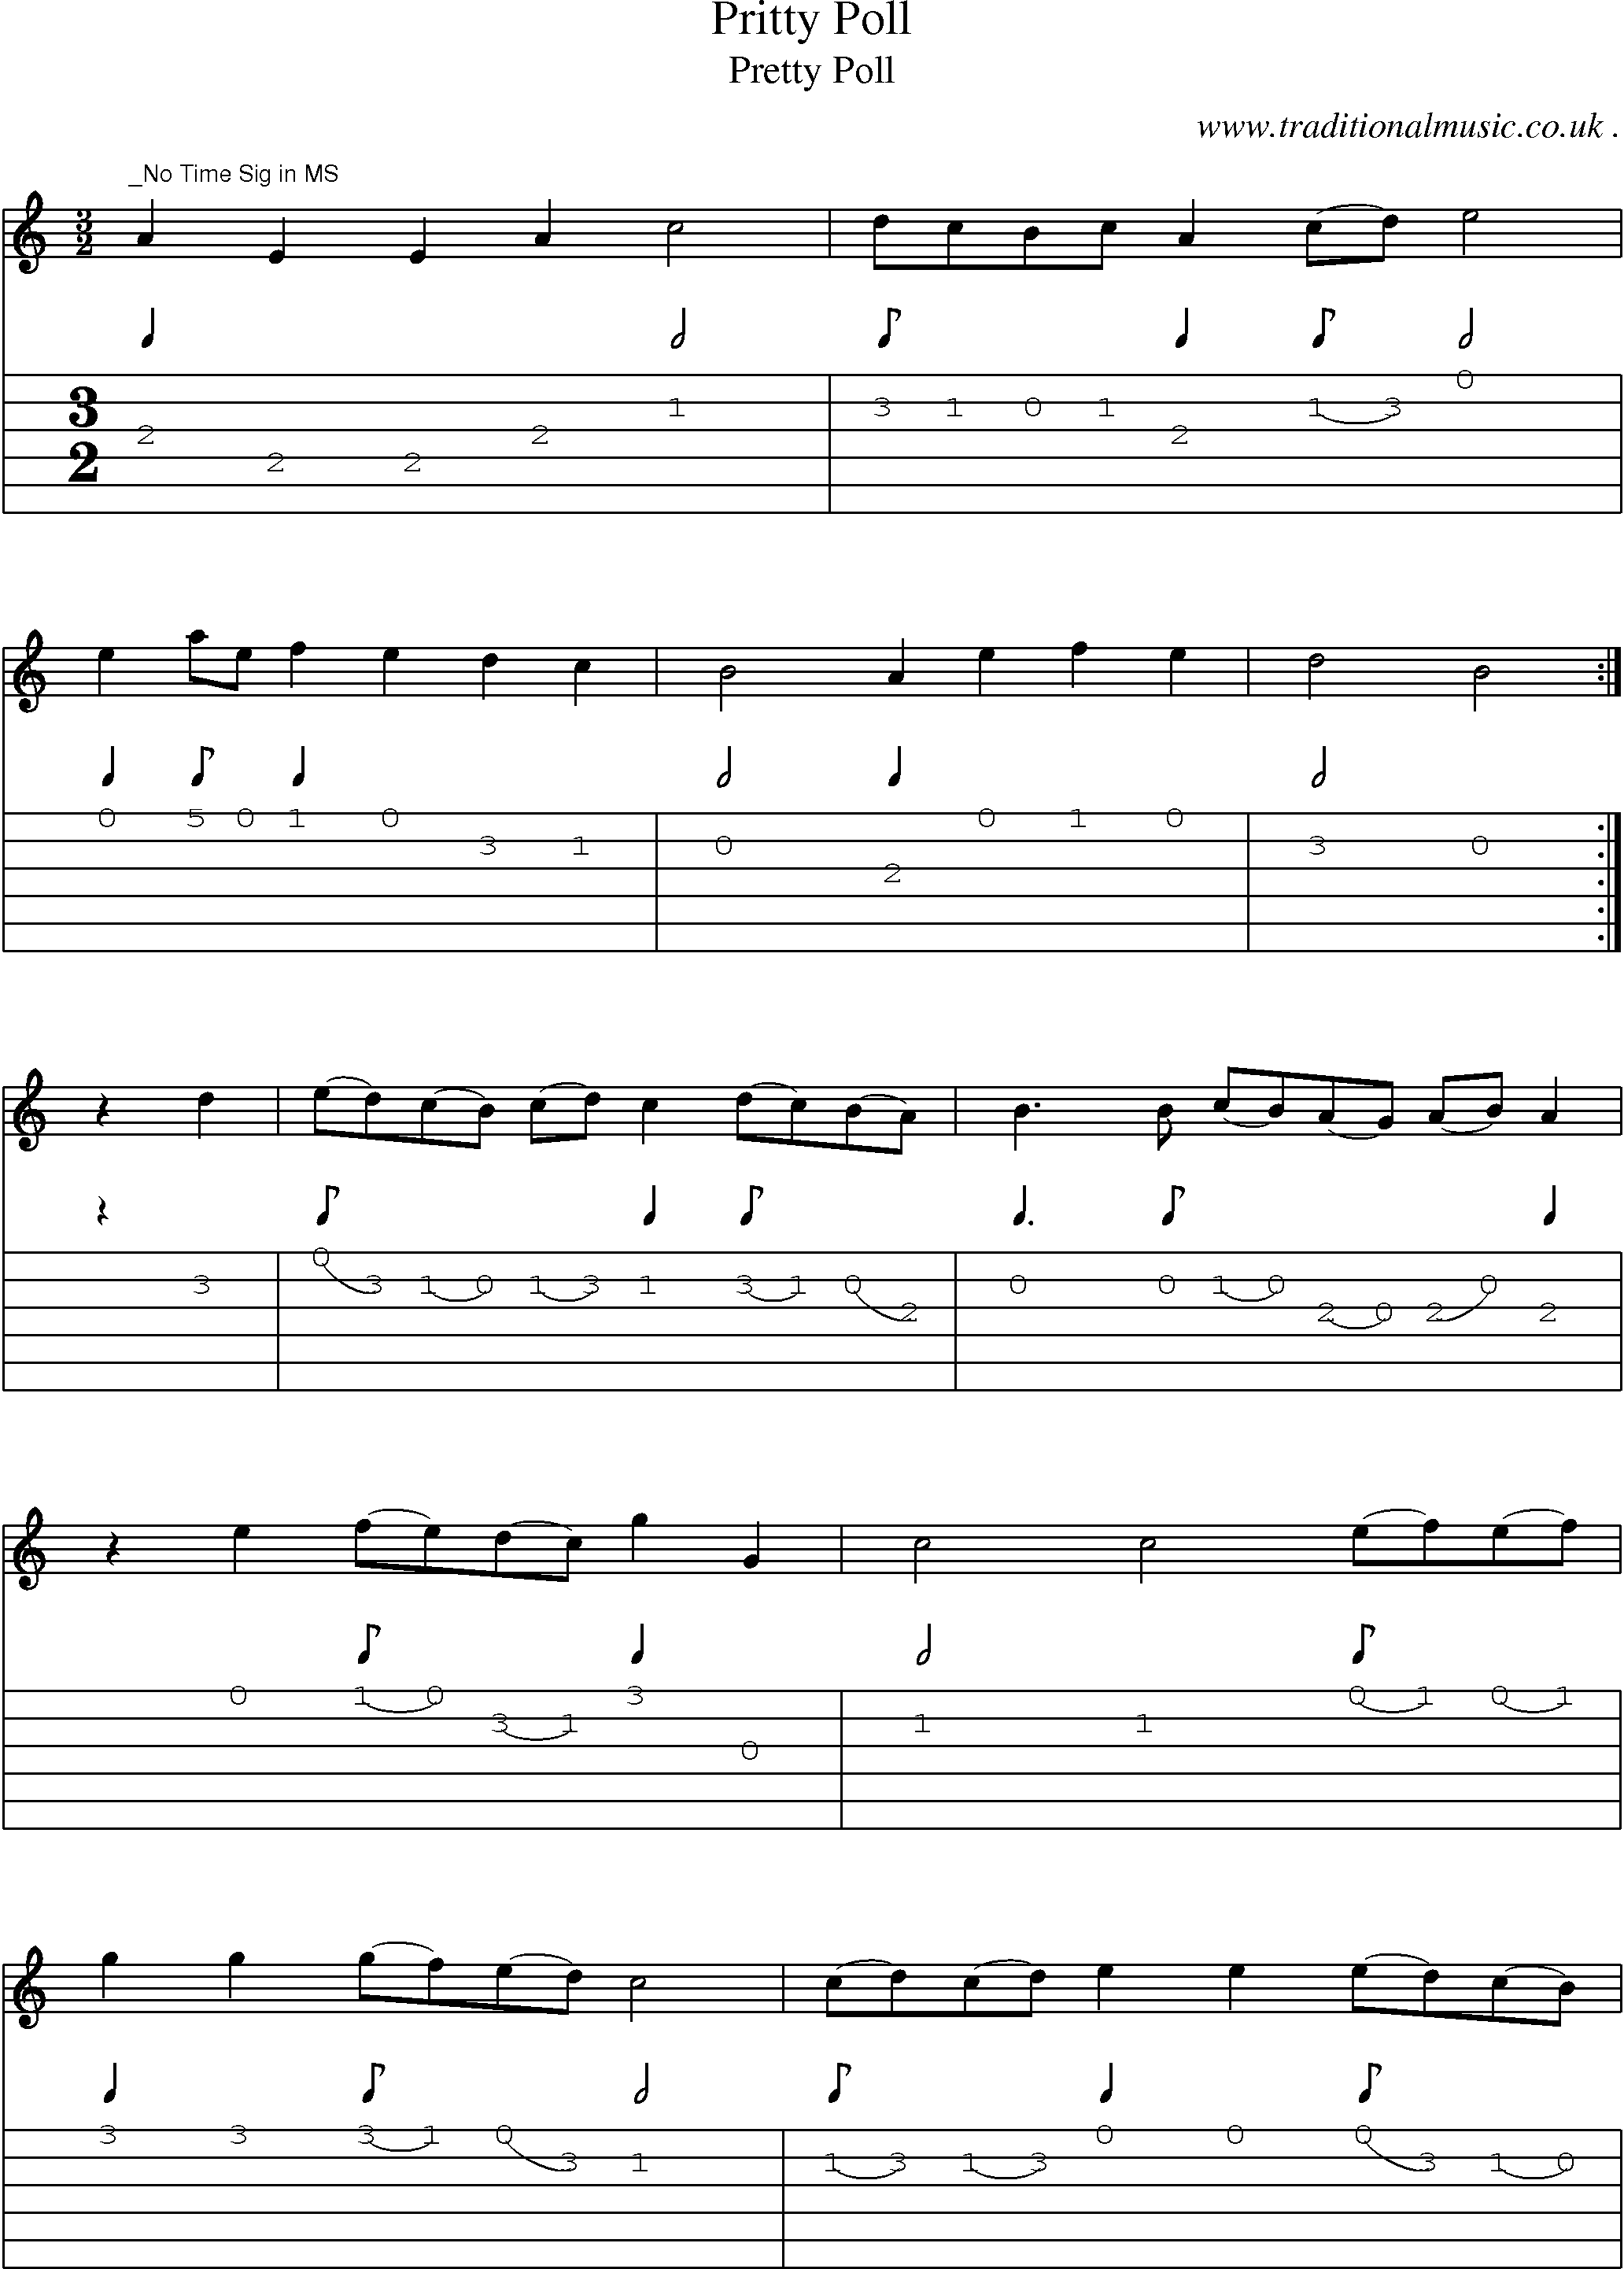 Sheet-Music and Guitar Tabs for Pritty Poll